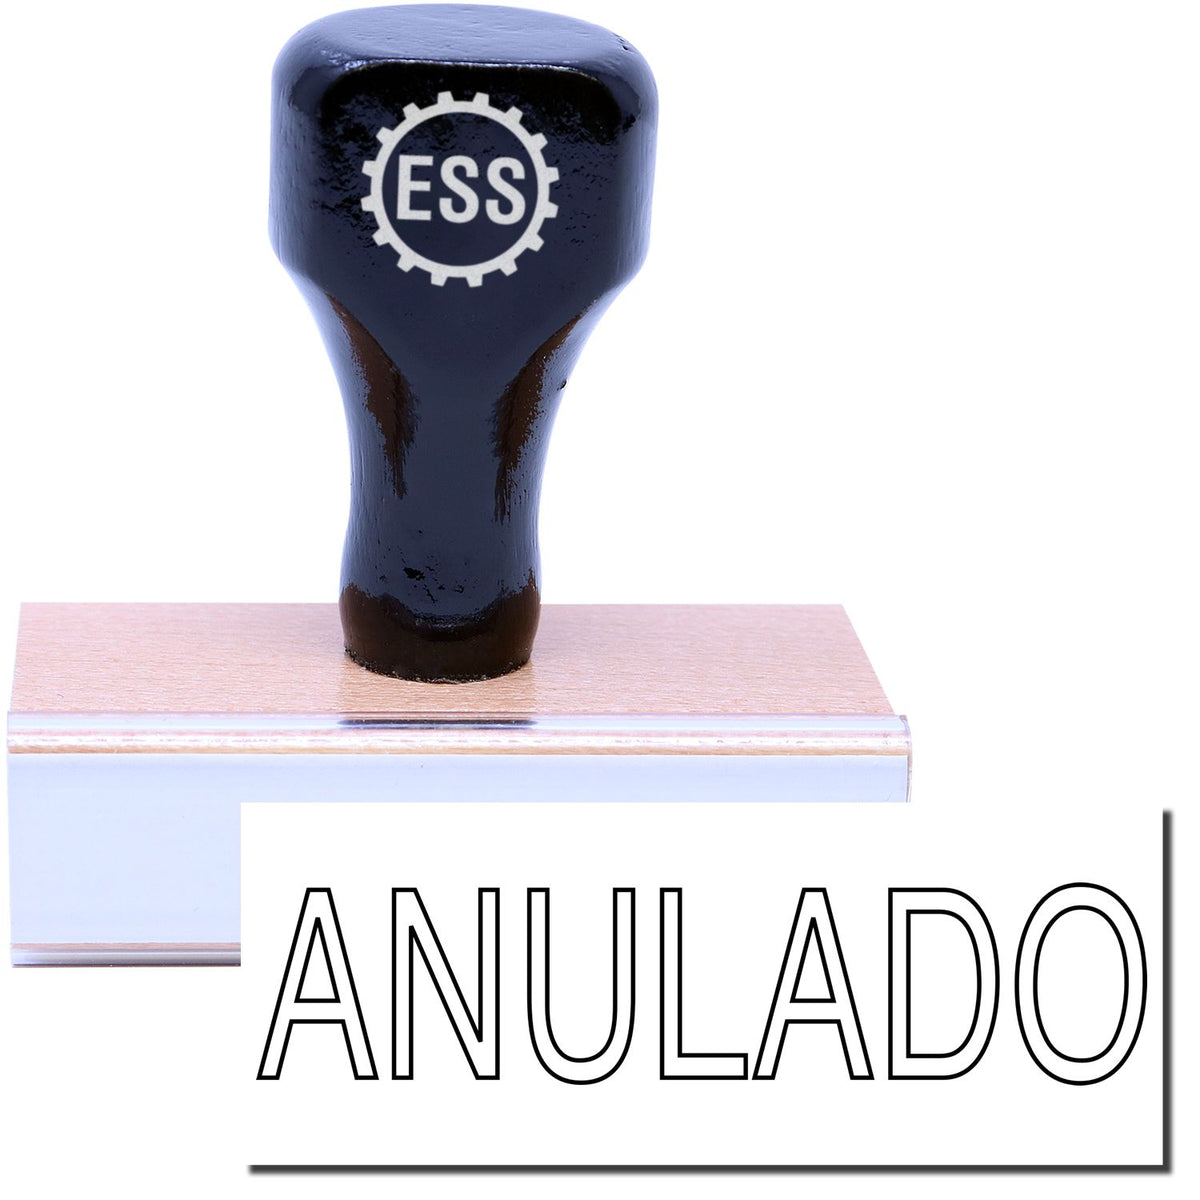 A stock office rubber stamp with a stamped image showing how the text &quot;ANULADO&quot; in an outline font is displayed after stamping.